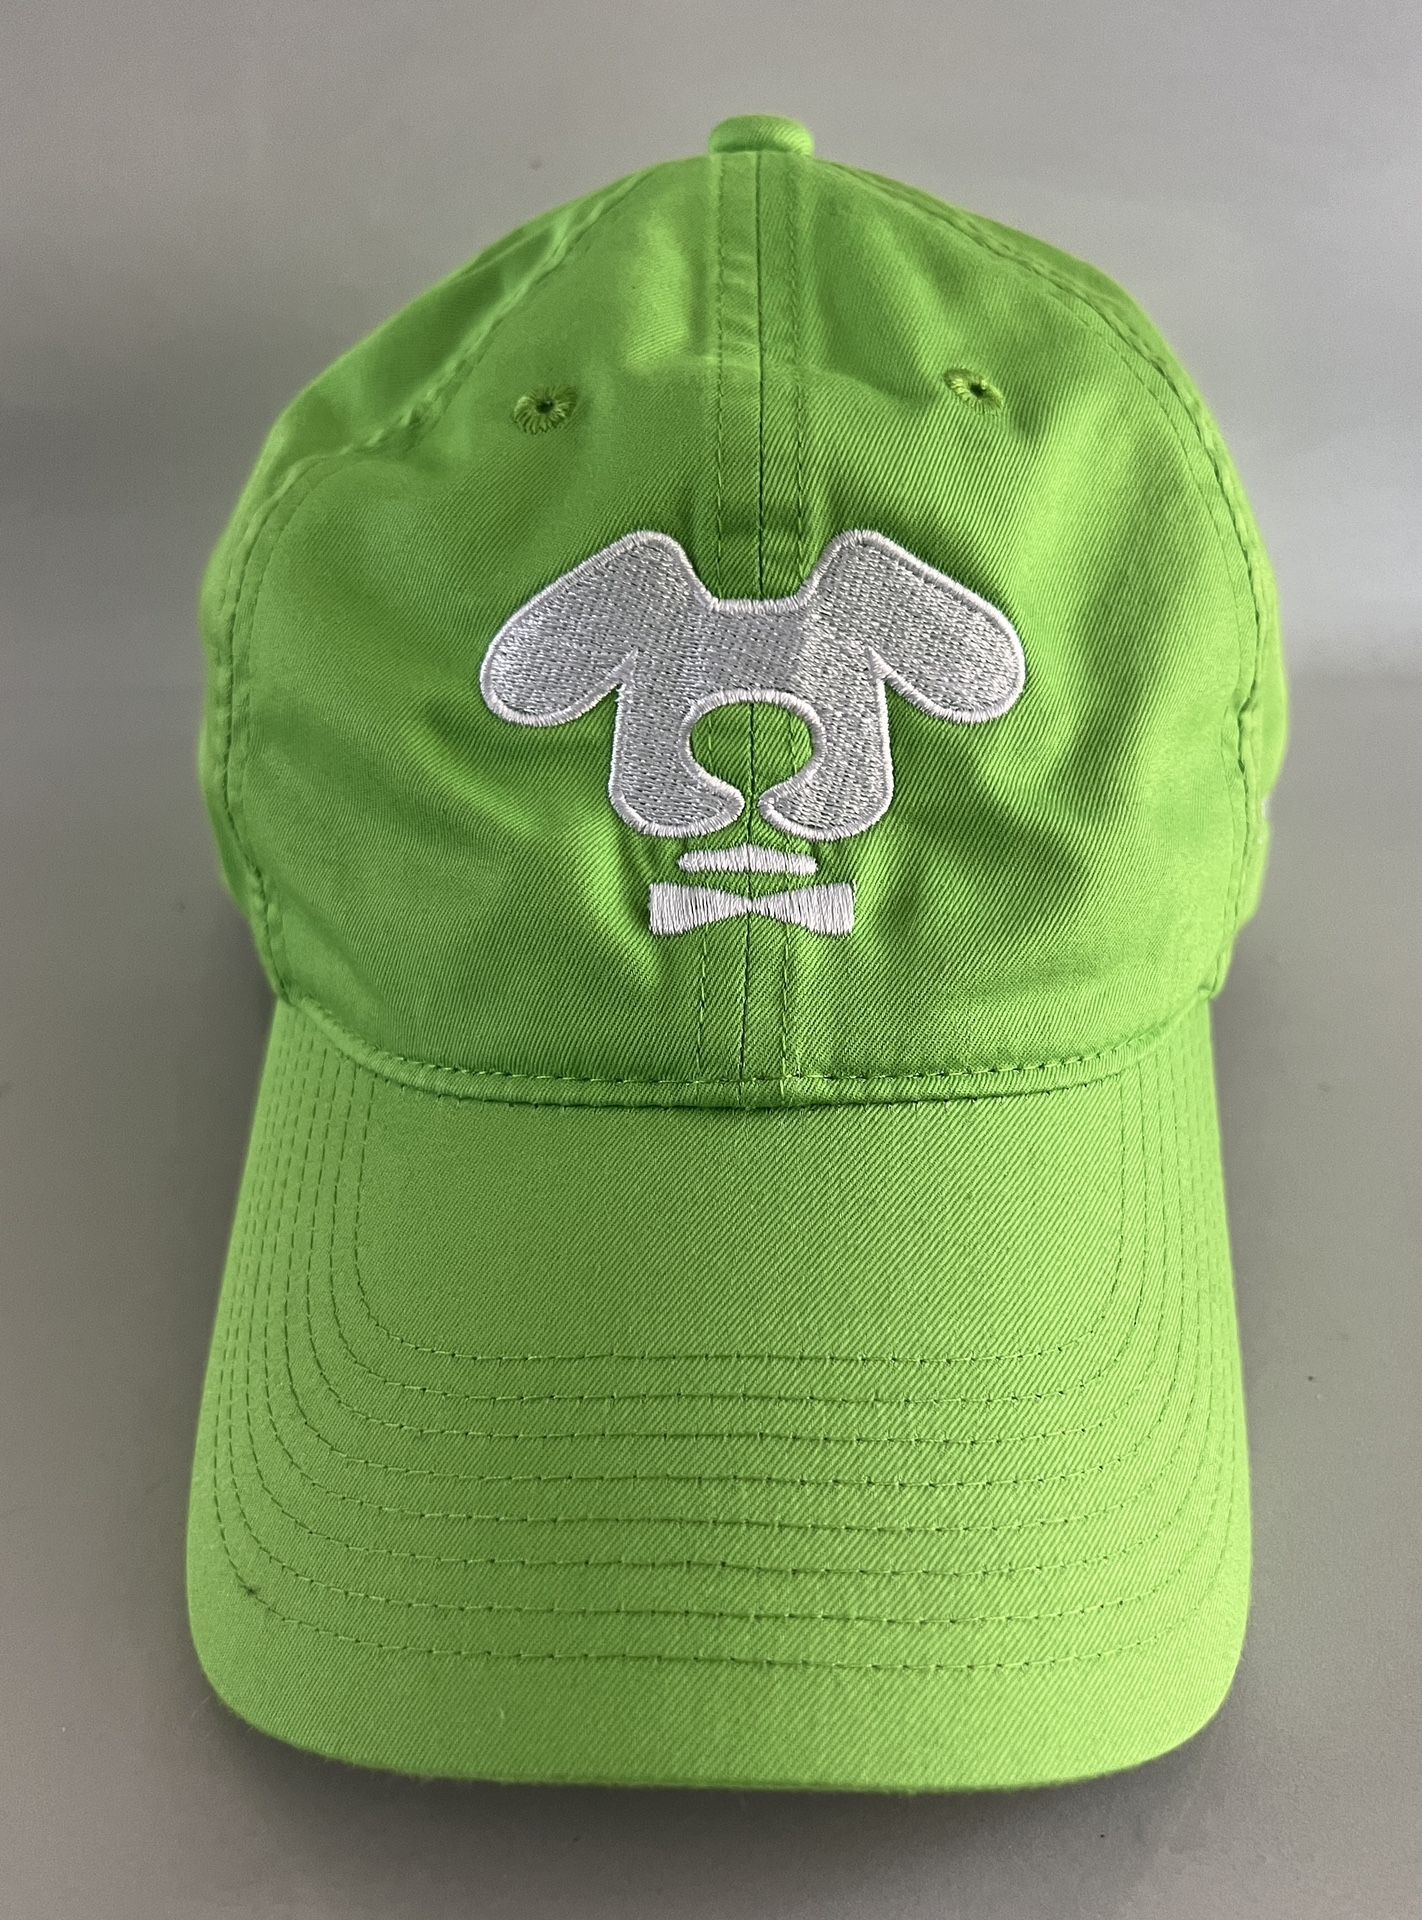 Nike Unstructured Twill Hat 580087-304 Mens Adjustable Cap Green Dog perfect  